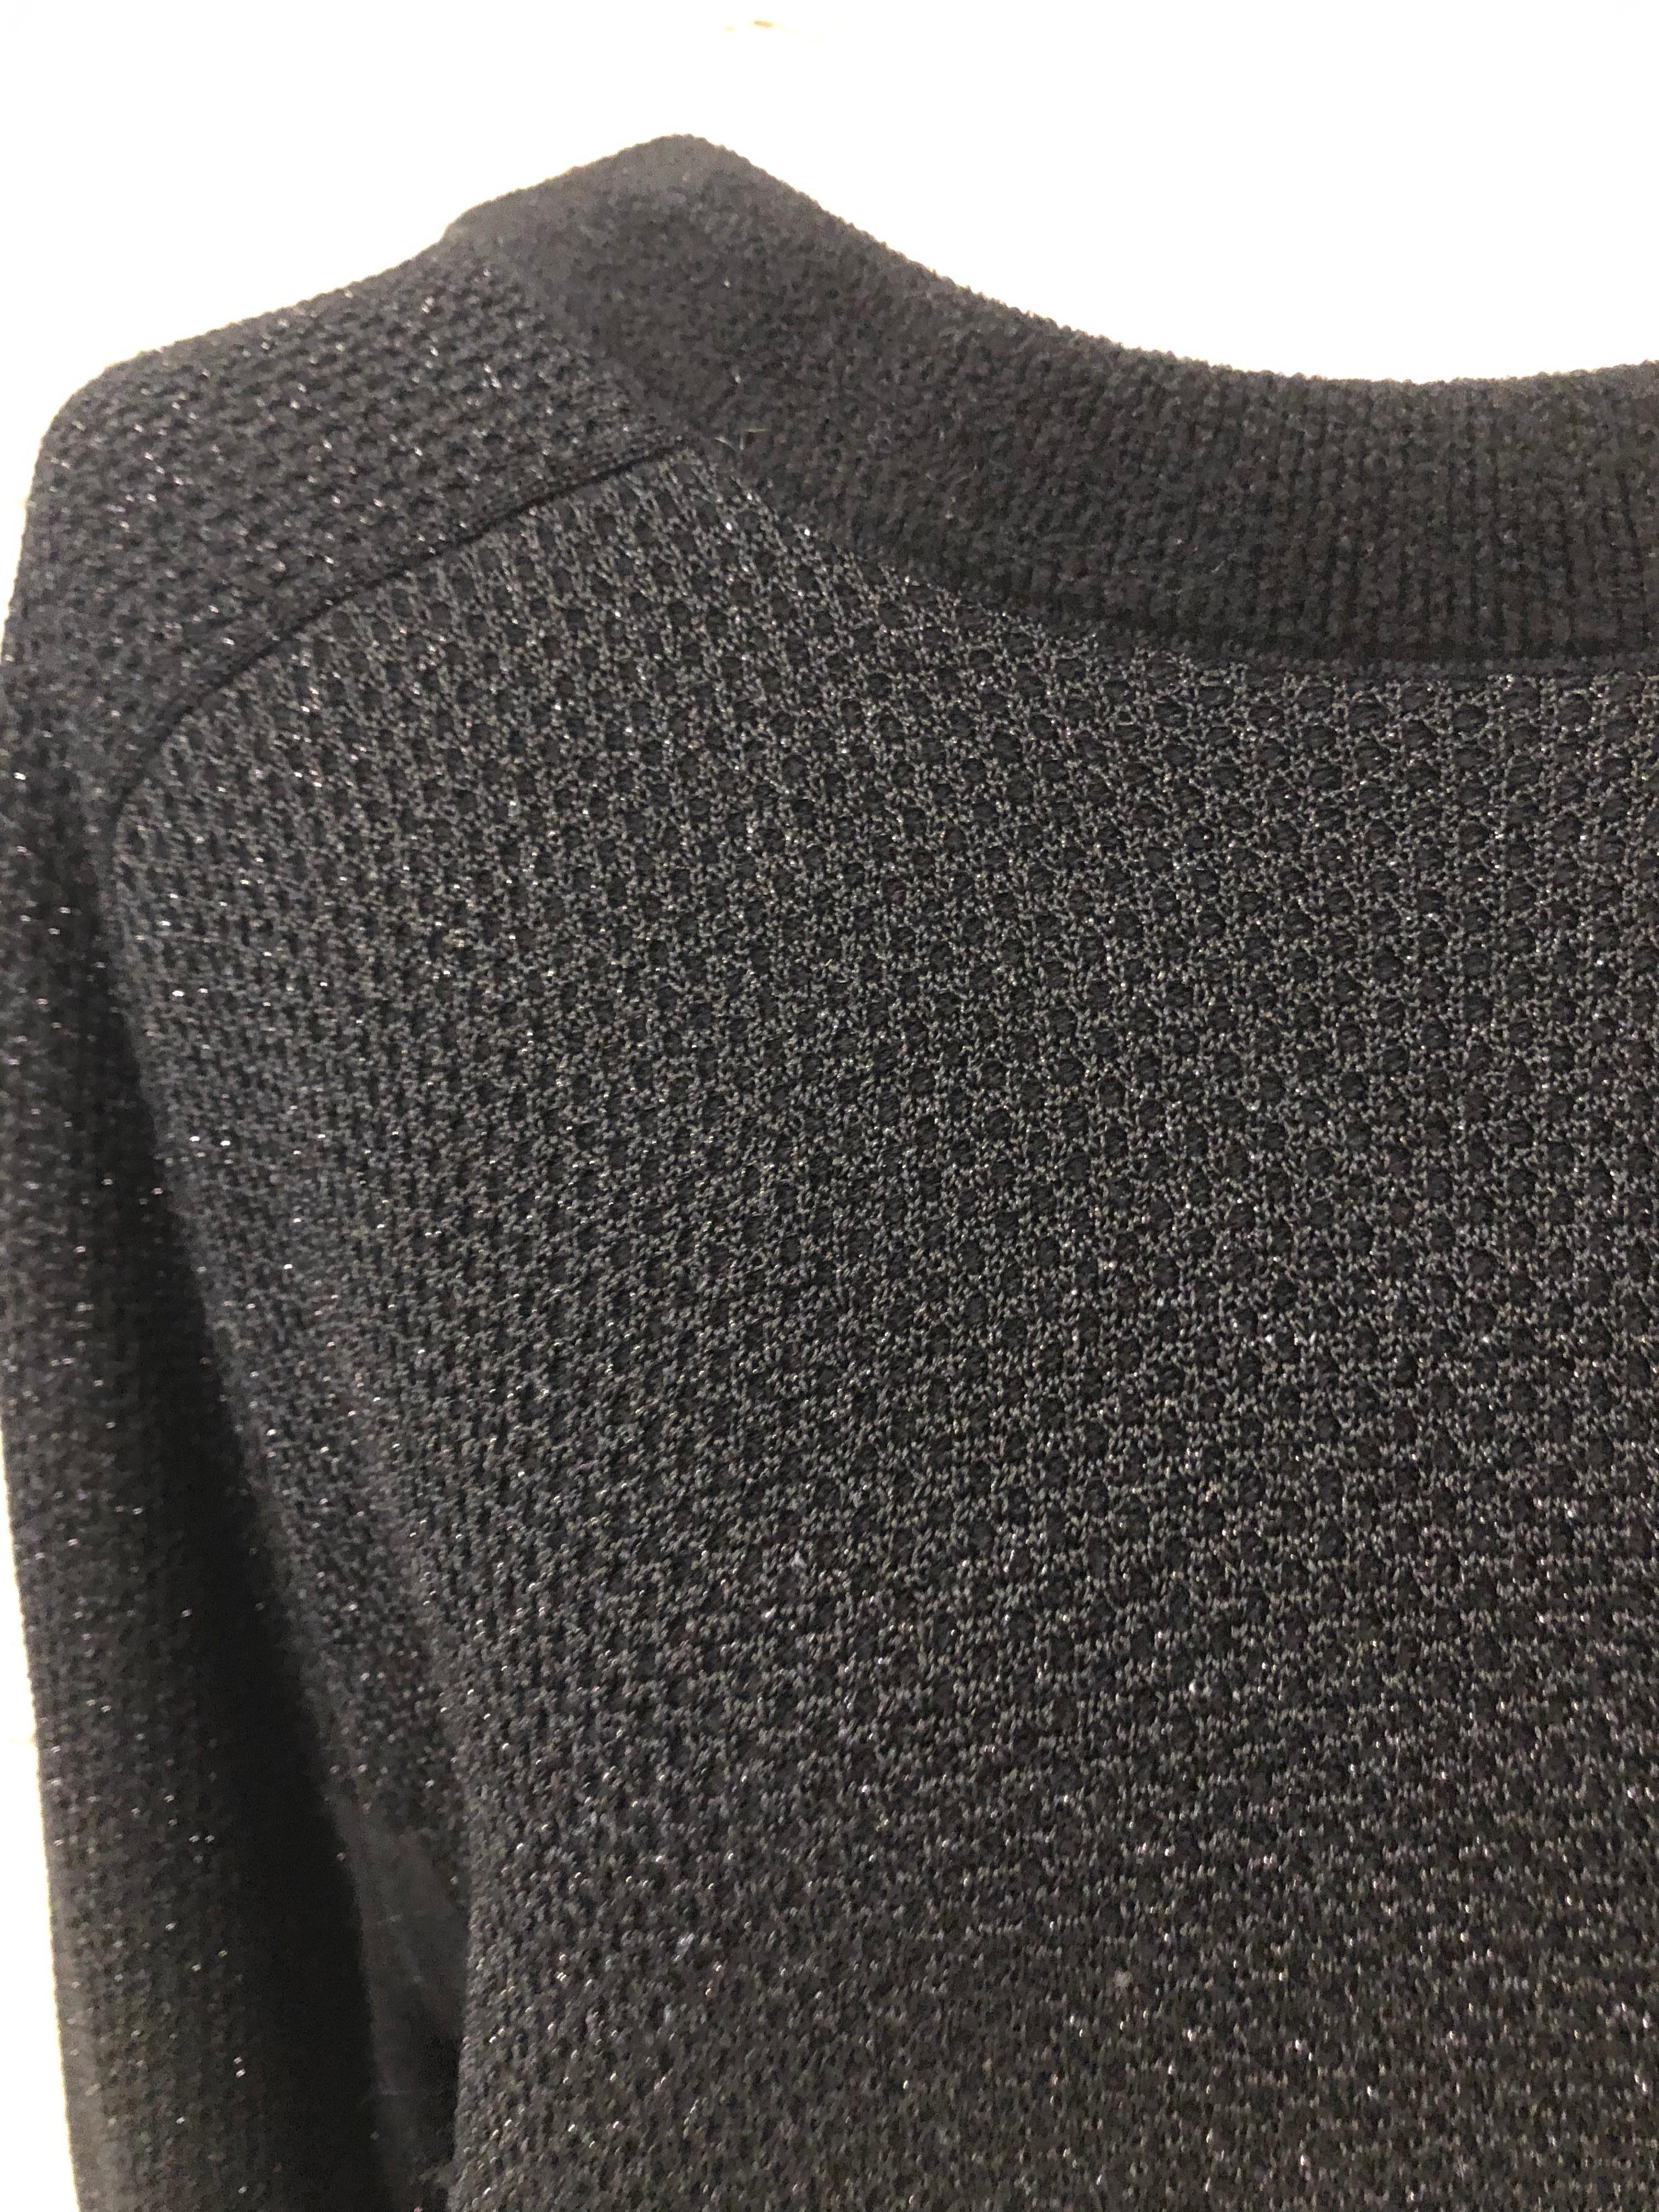 This is a beautiful Chanel short dress in a discreet lurex knit.
Long sleeves with a very deep v   back. CC logo embroidered on the bottom of the dress
Demure yet sexy.
Fits a size  4 US.
Composition Cashmere and viscose.
Very good